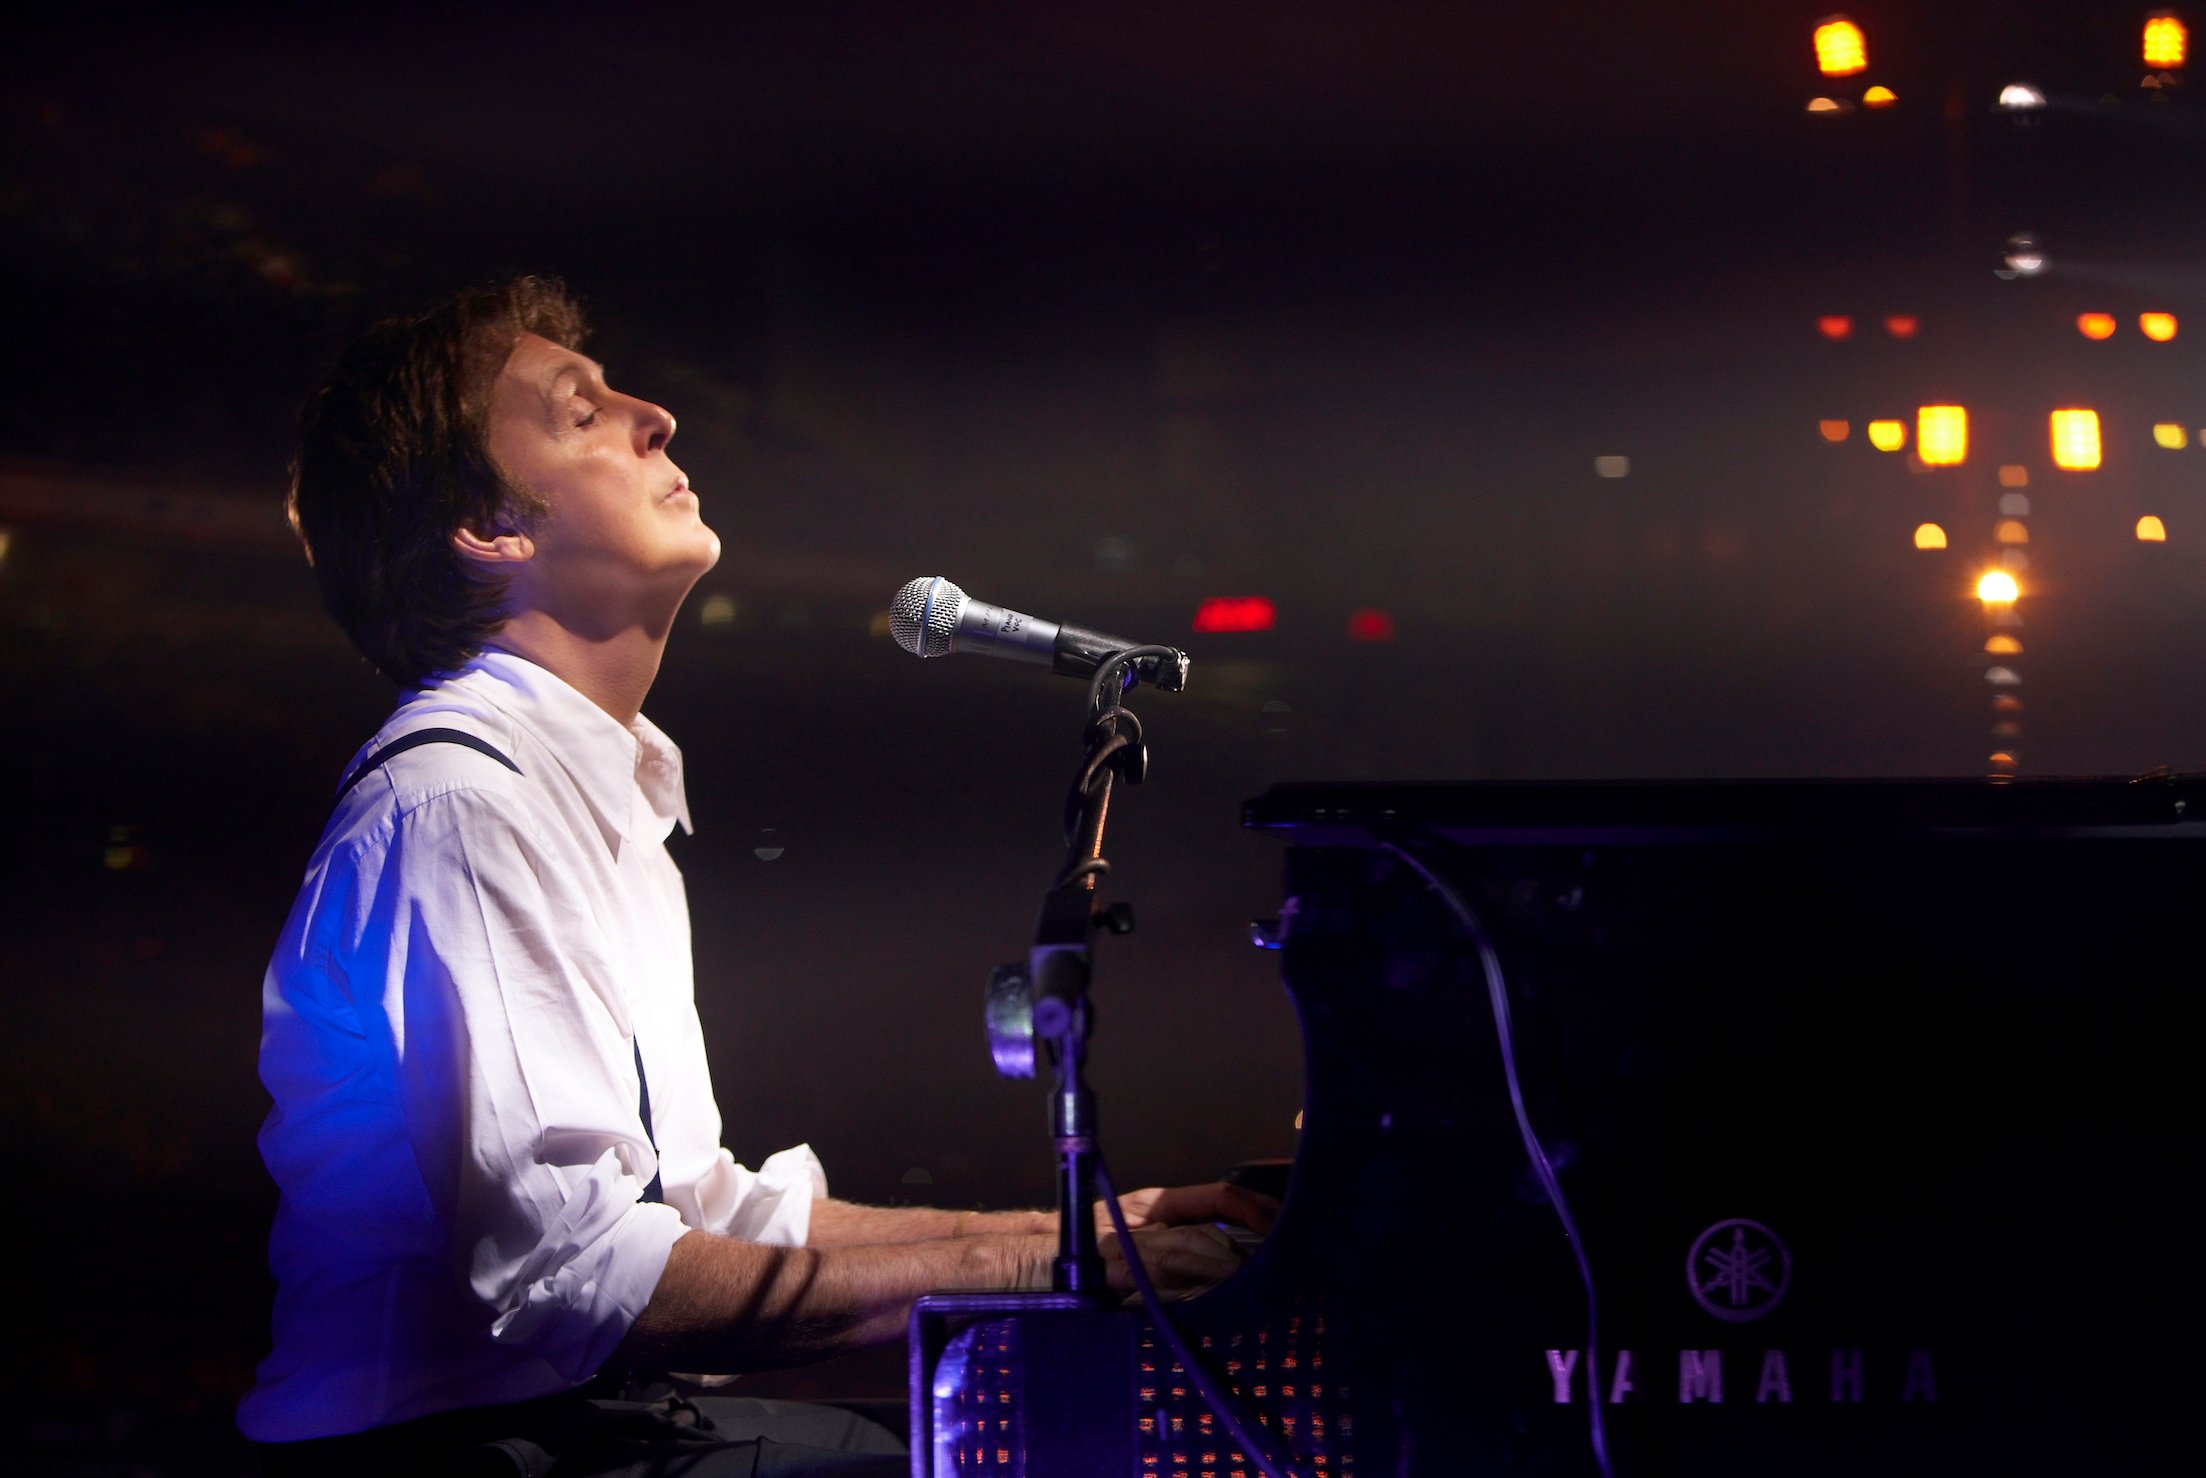 Paul McCartney performs during the Liverpool Sound concert at Anfield Stadium in Liverpool, England, in 2008